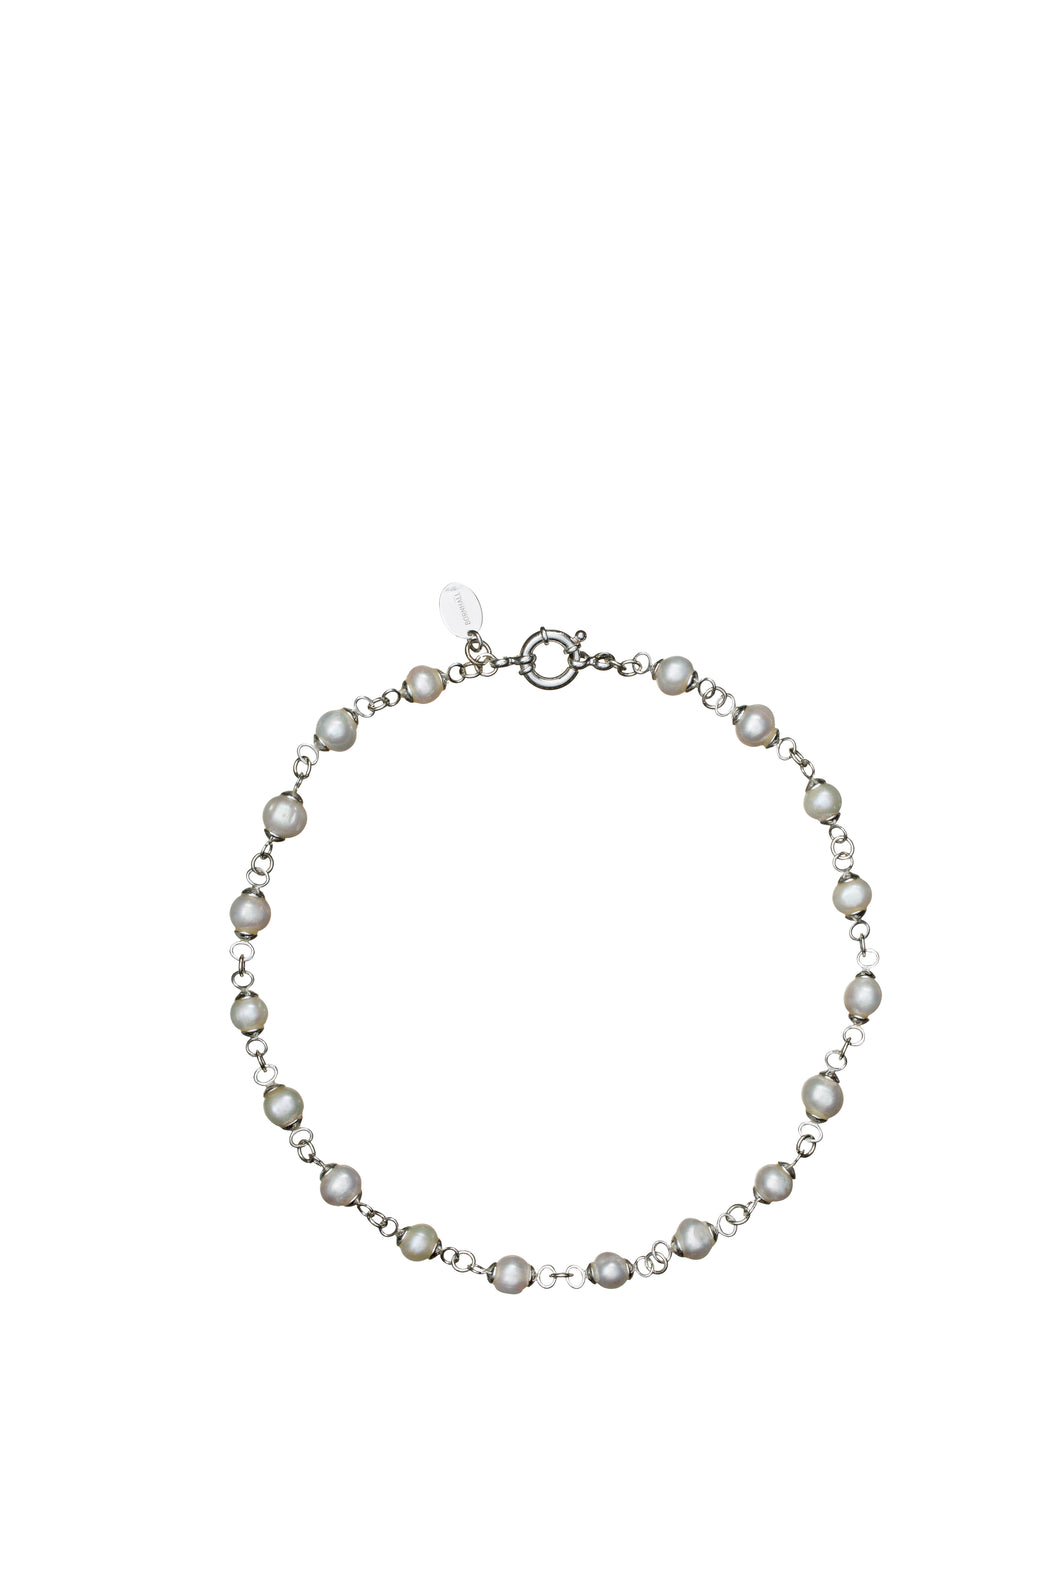 Round Pearl Necklace with Silver loops